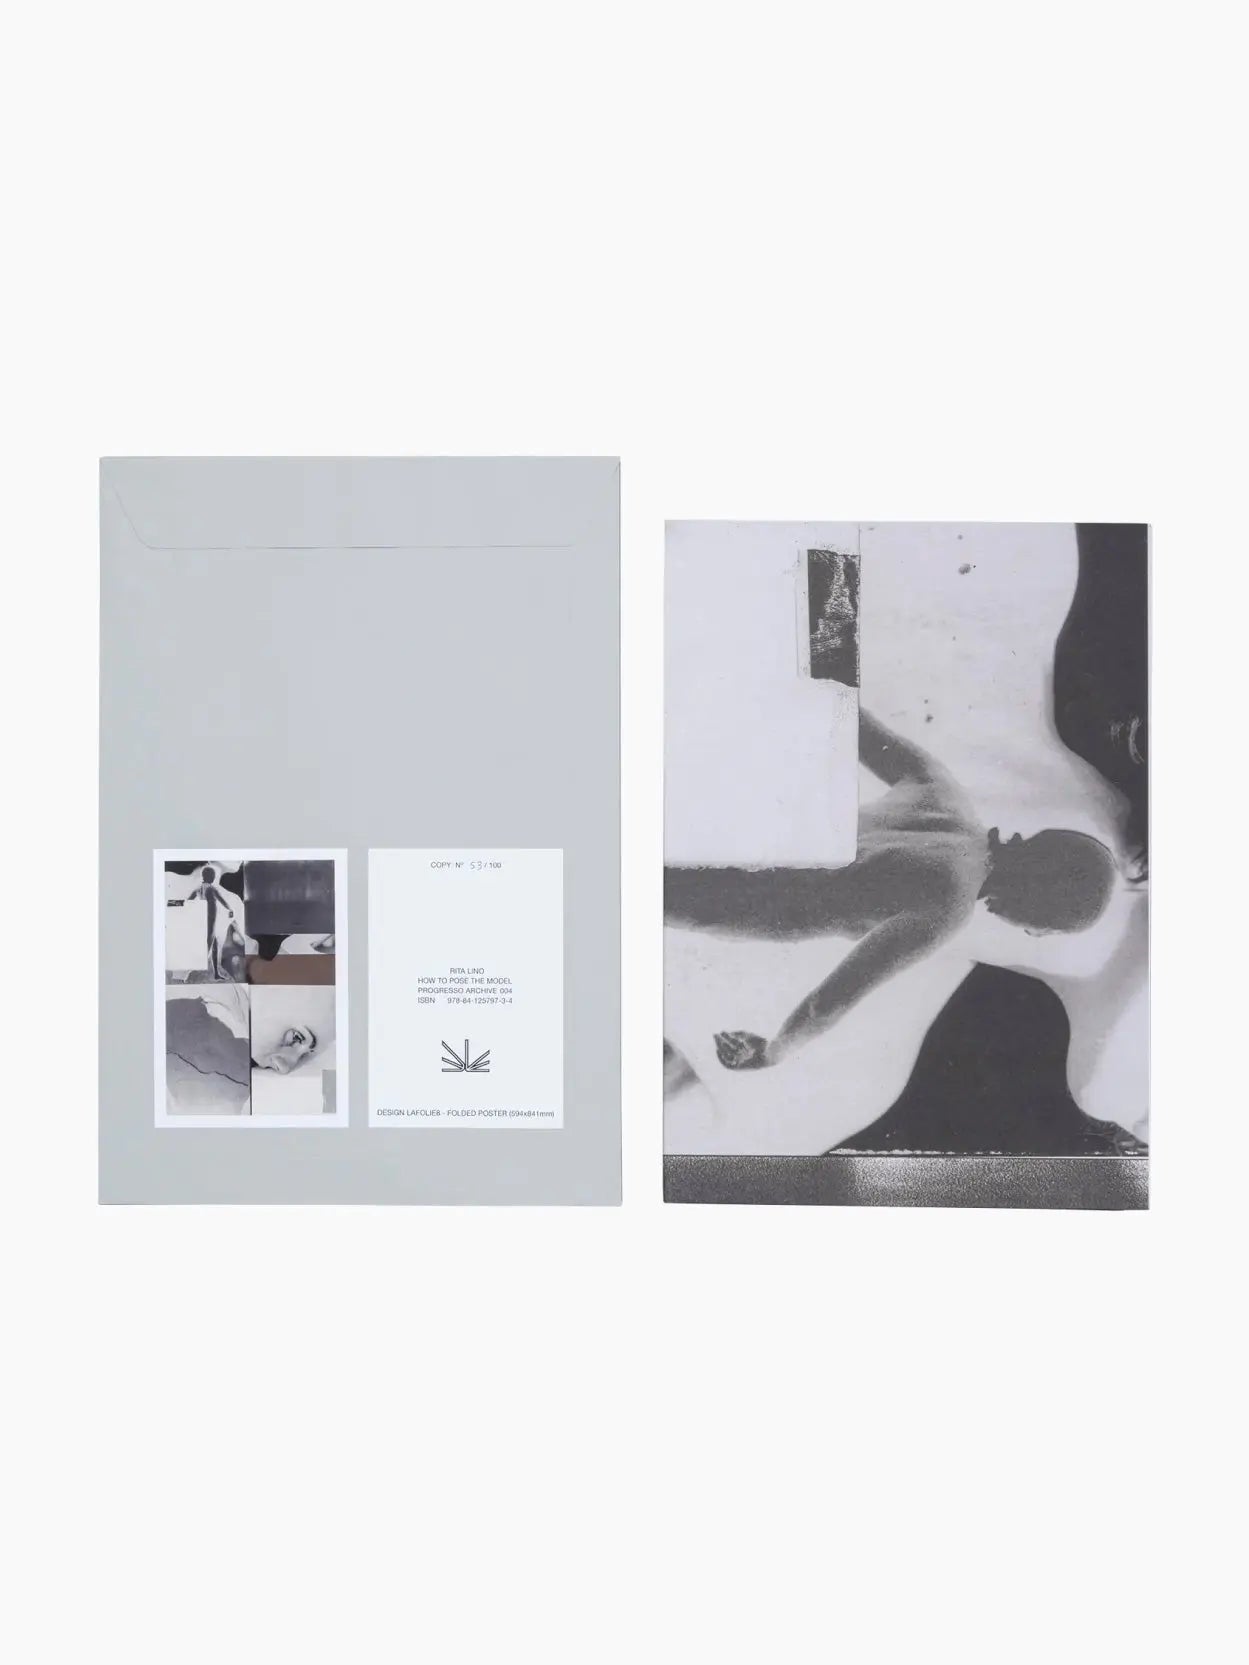 A gray folder on the left side with two black-and-white photos and text on the front. Next to it on the right is a black-and-white photograph featuring an abstract figure of a person in motion. This elegant display might be found in a chic store like Bassalstore in Barcelona, such as "How to Pose the Model by Rita Lino" by Progresso.